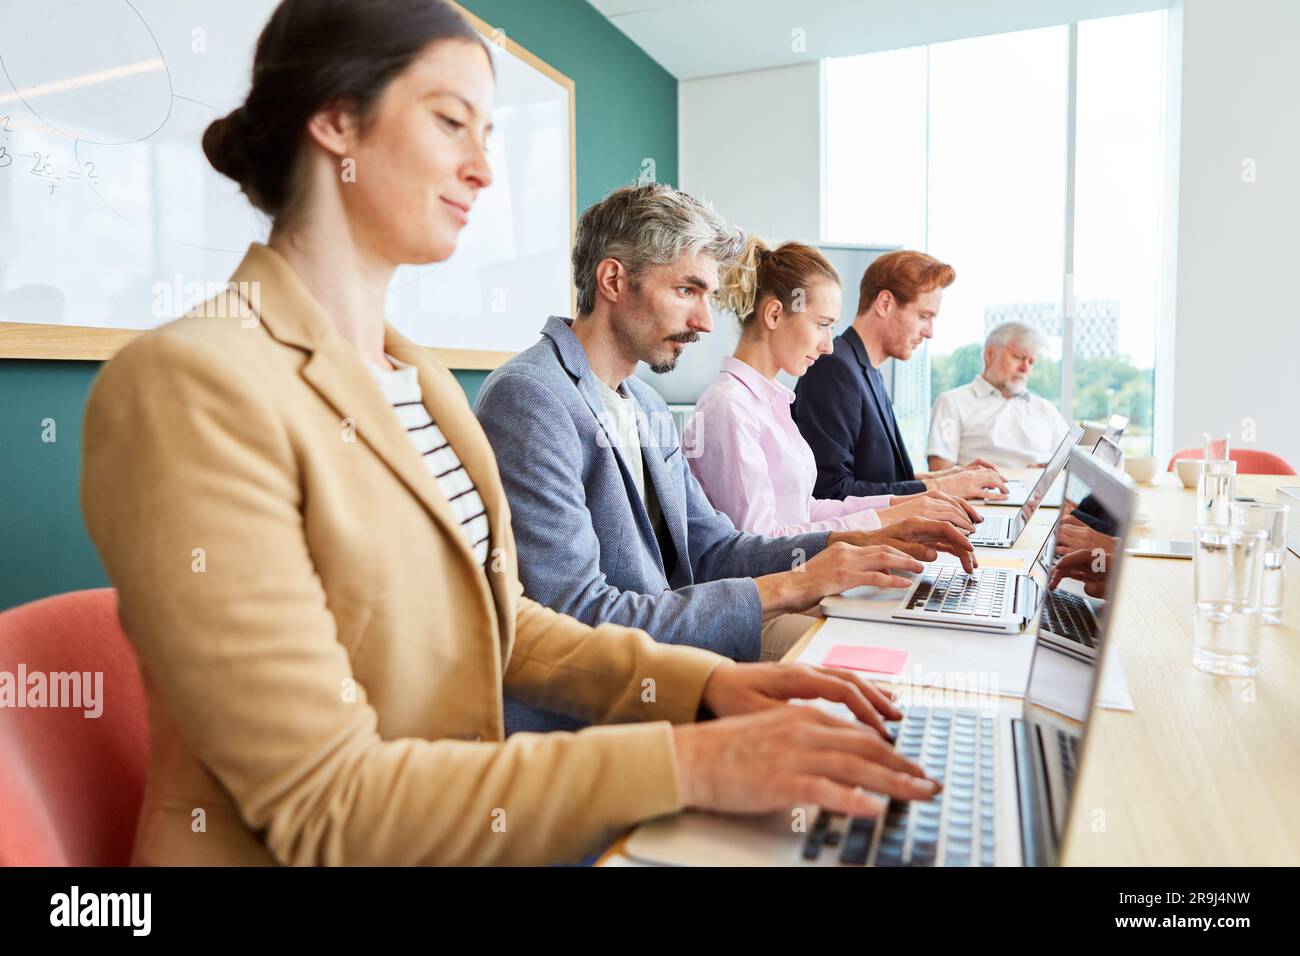 Business team using laptops while working in office Stock Photo